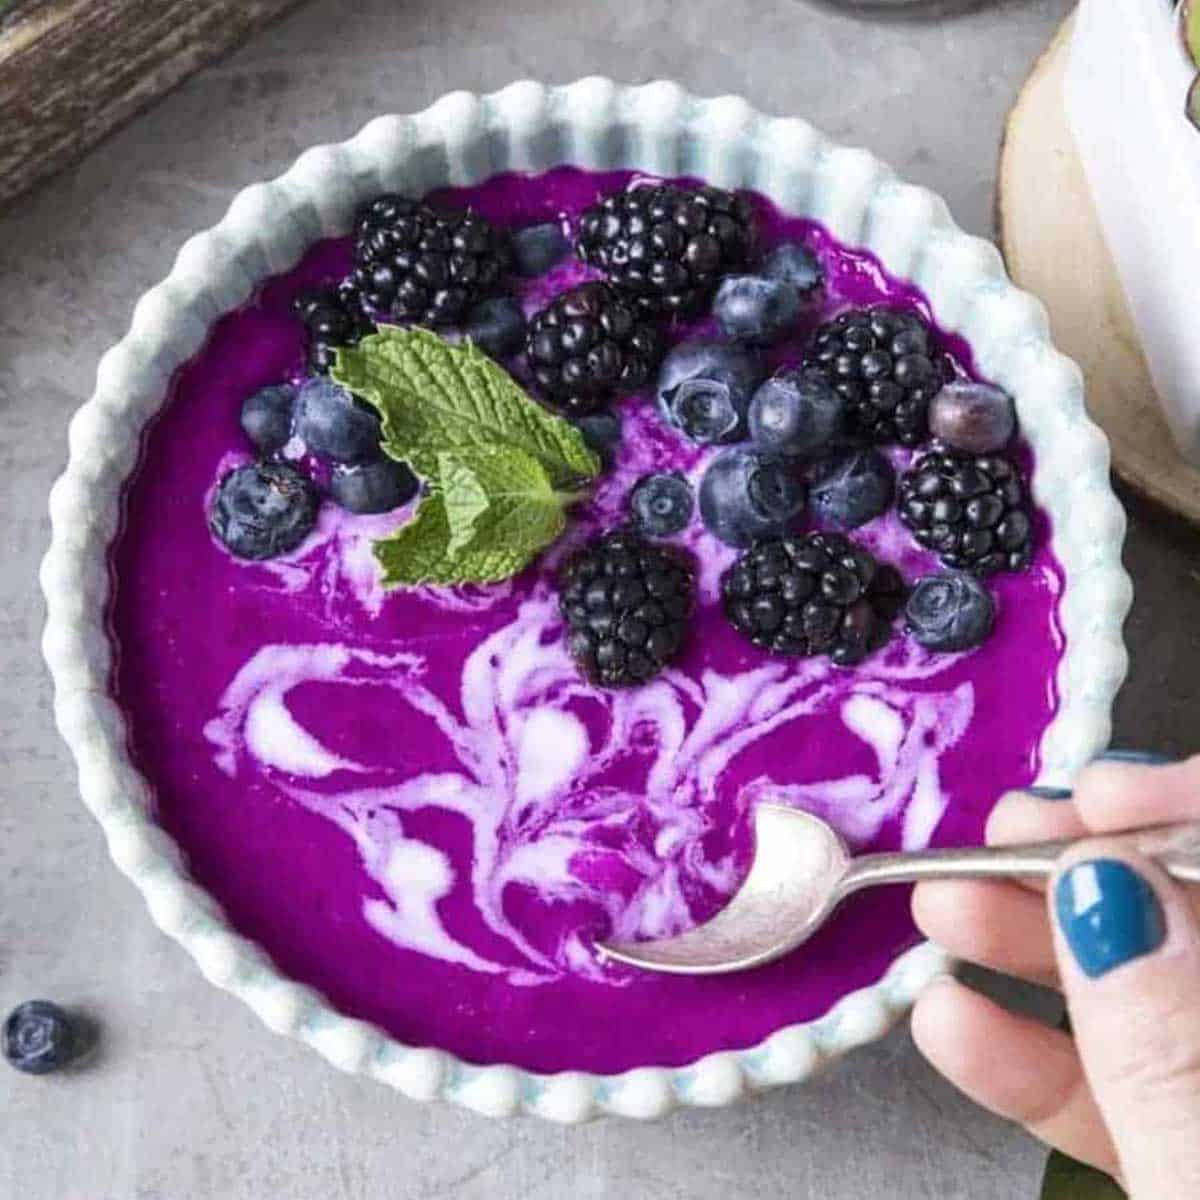 white scalloped bowl with purple dragon fruit smoothie in it topped with blueberries, blackberries, coconut whipped cream and a spoon.